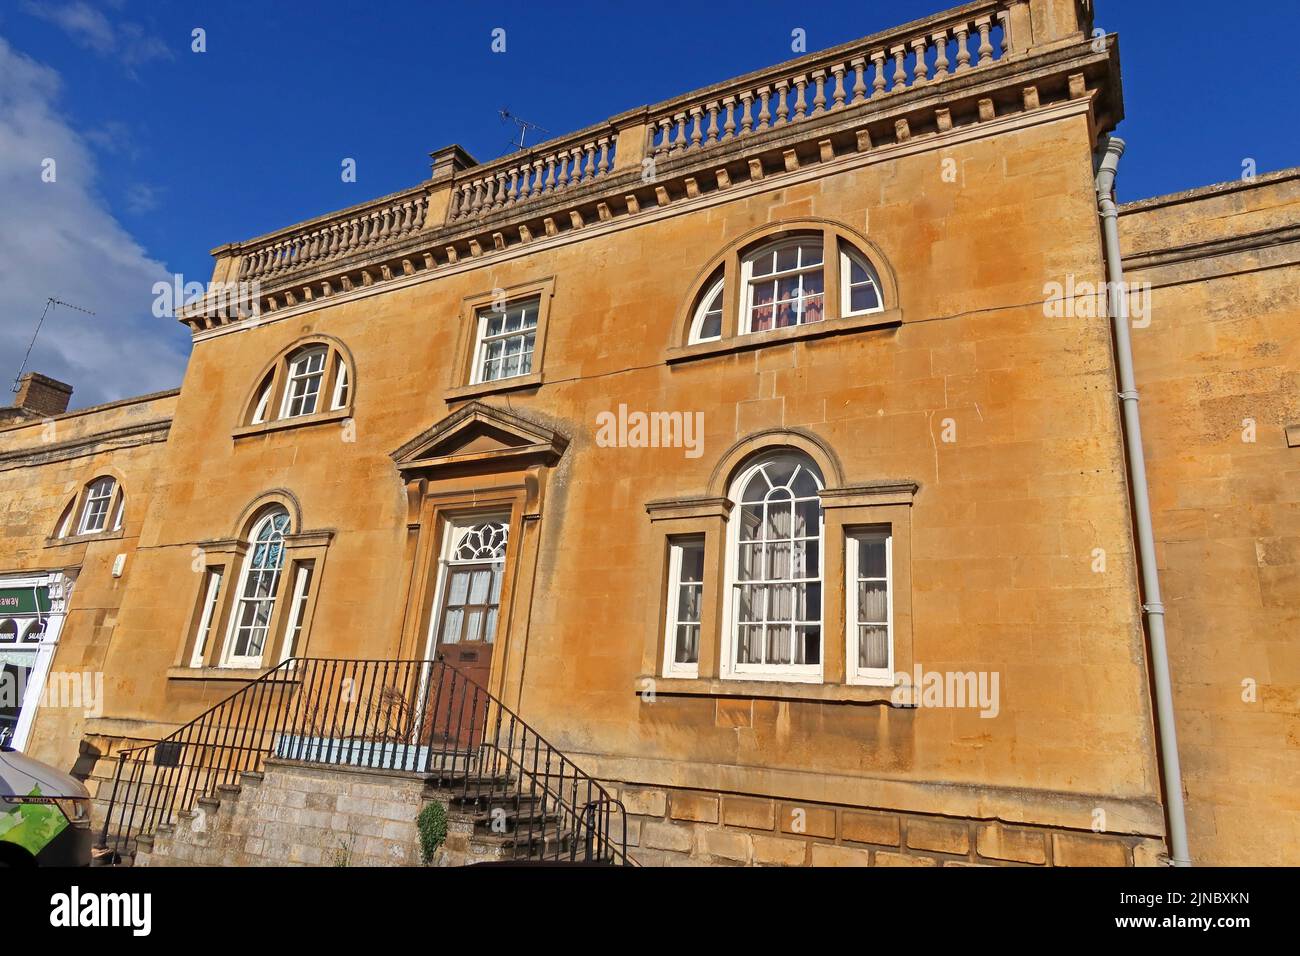 High St Buildings, Moreton-in-Marsh, Evenlode Valley, Cotswold District Council, Gloucestershire, ENGLAND, GROSSBRITANNIEN, GL56 0LW Stockfoto